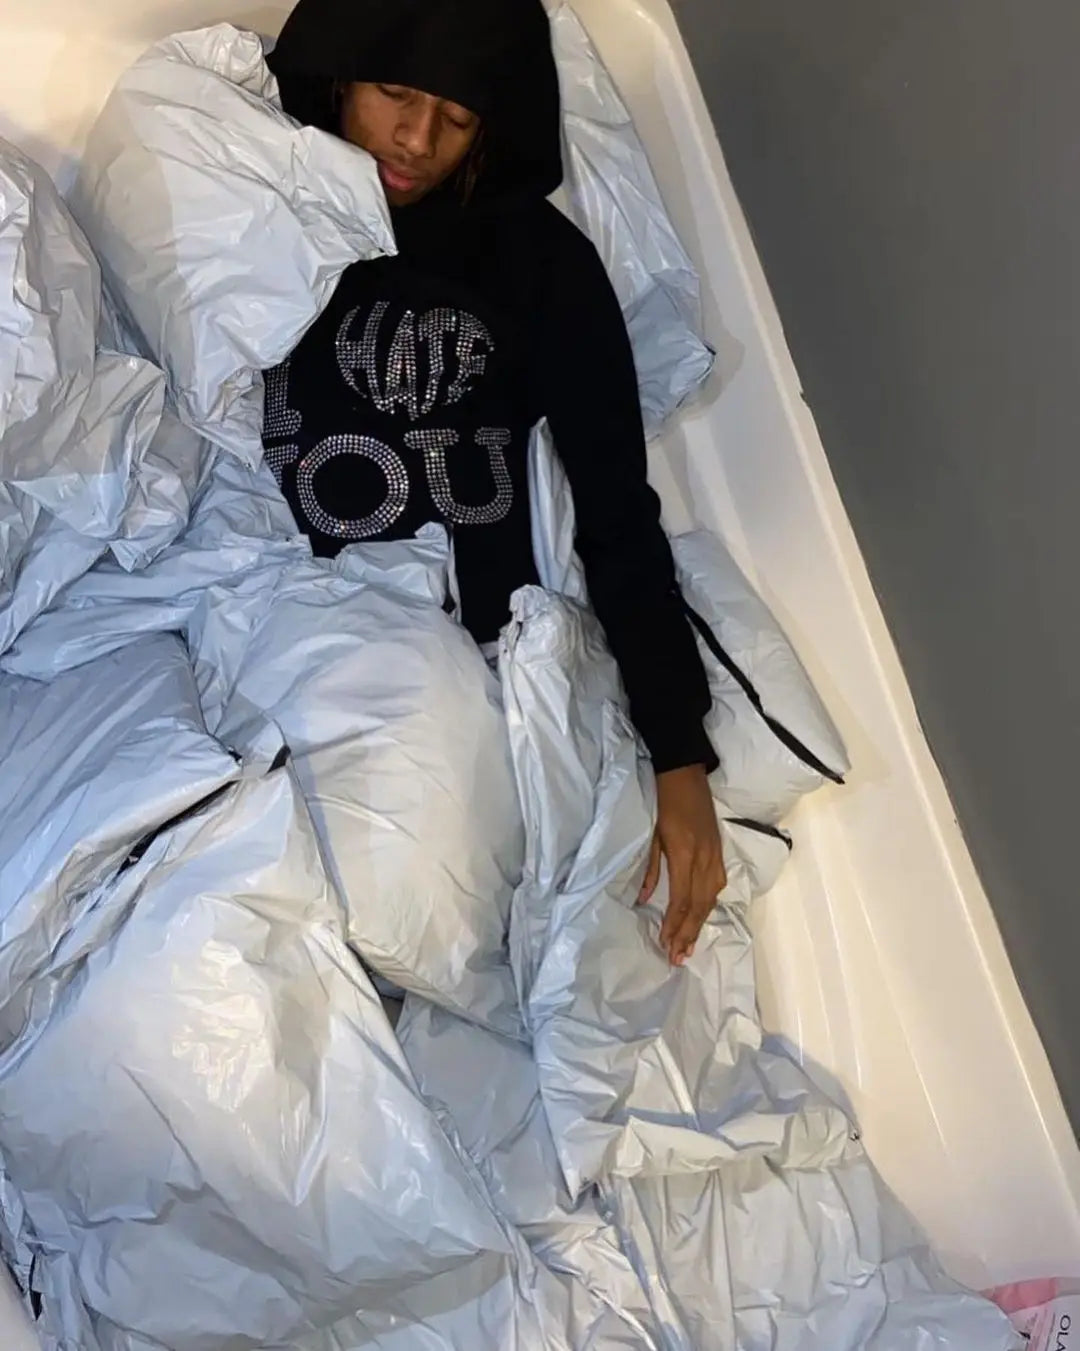 A person wearing a Maramalive™ Oversized Diamond skull Print Streetwear Hoodie Vintage Streetwear Tops Sweatshirt Goth Hoodies Women Y2k Clothes, showcasing High Street Style, is lying in a bathtub filled with plastic packages.